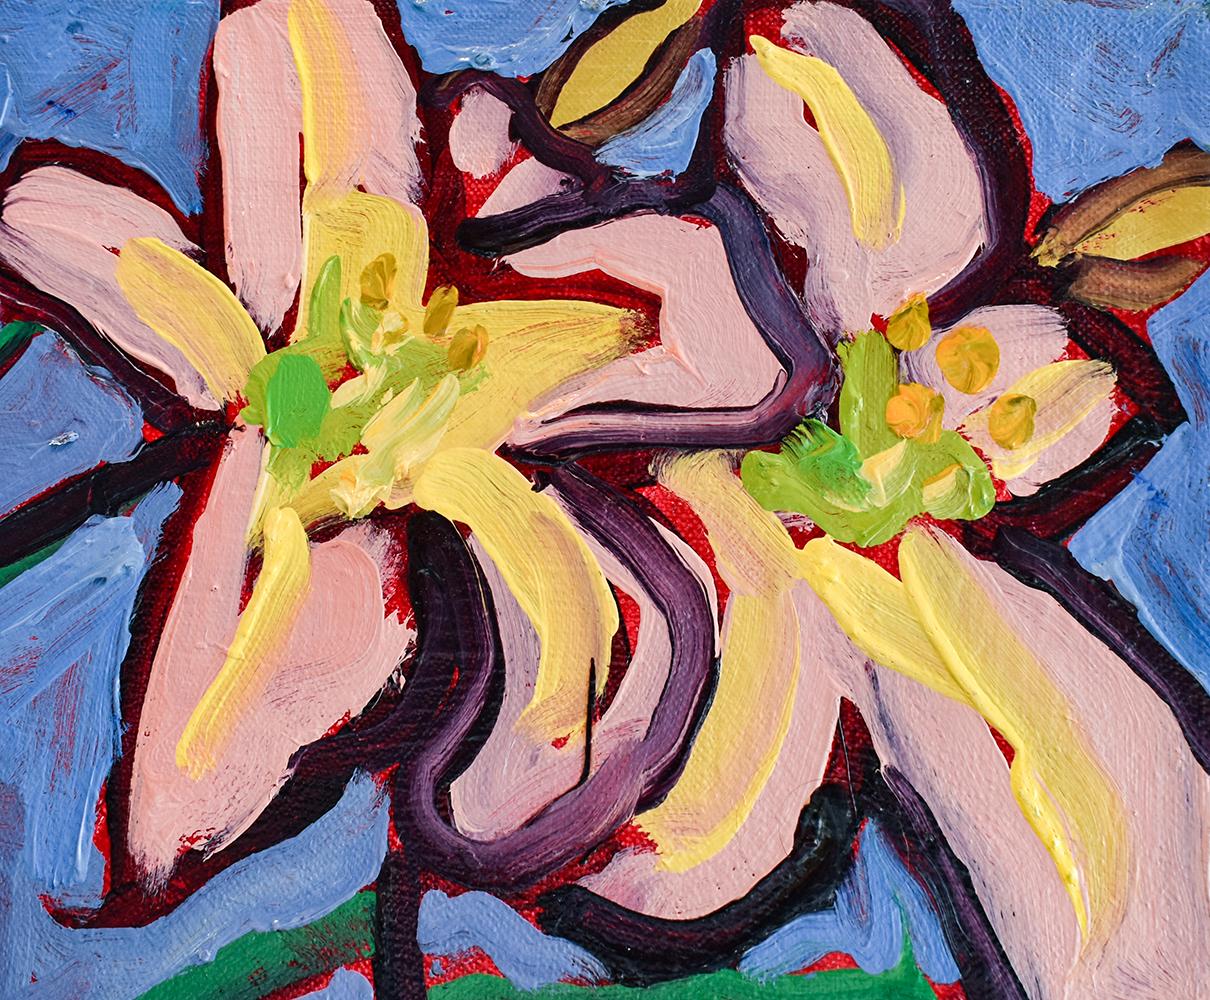 Summer Day Lilies (Contemporary Still Life of Vibrant Lilies, Oil on canvas)  - Painting by Dan Rupe